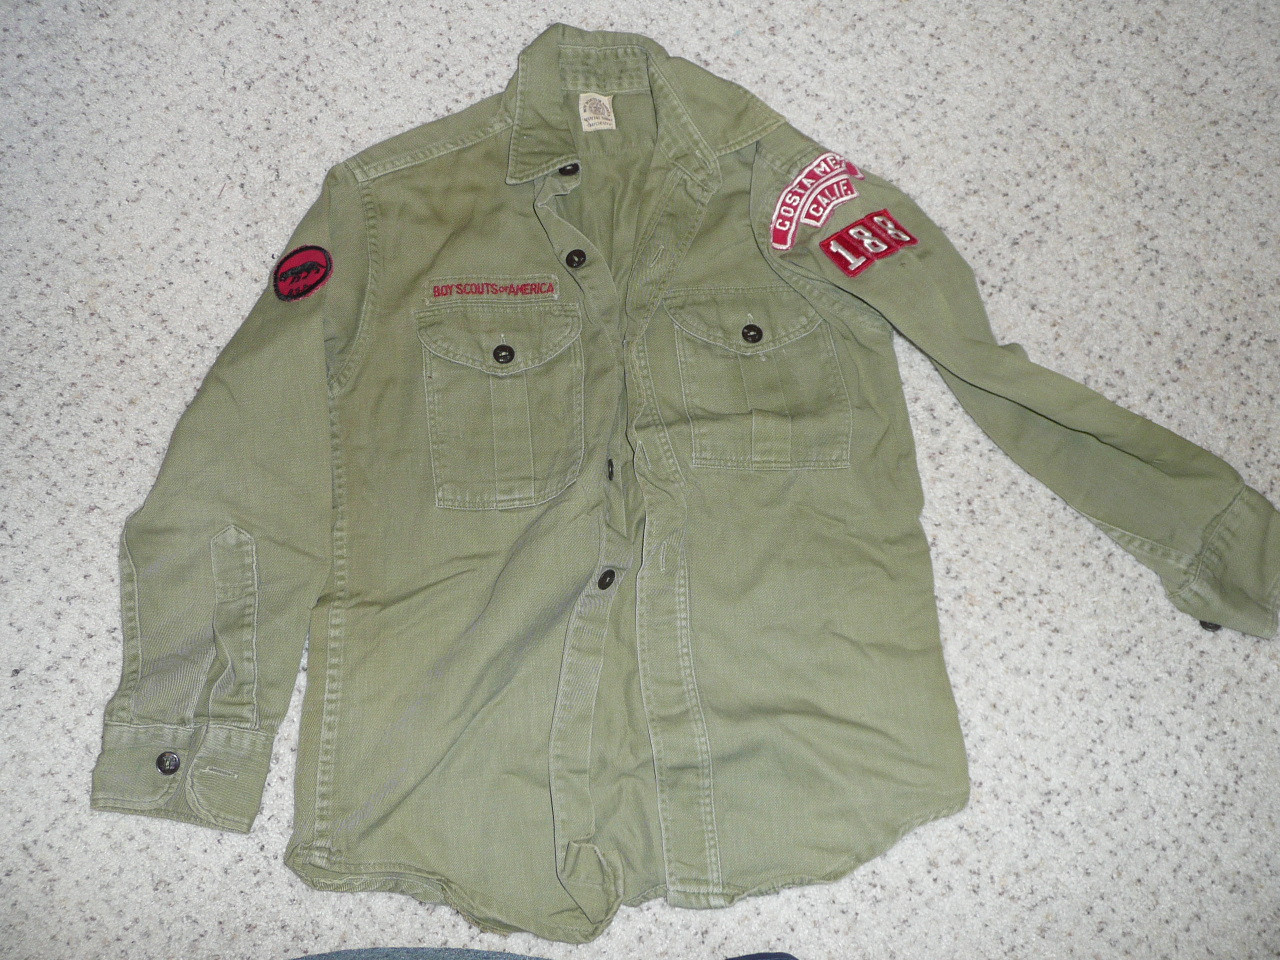 1960's Boy Scout Uniform Shirt with some patches and insignia from Costa Mesa CA, 17" Chest and 25" Length, #FB2